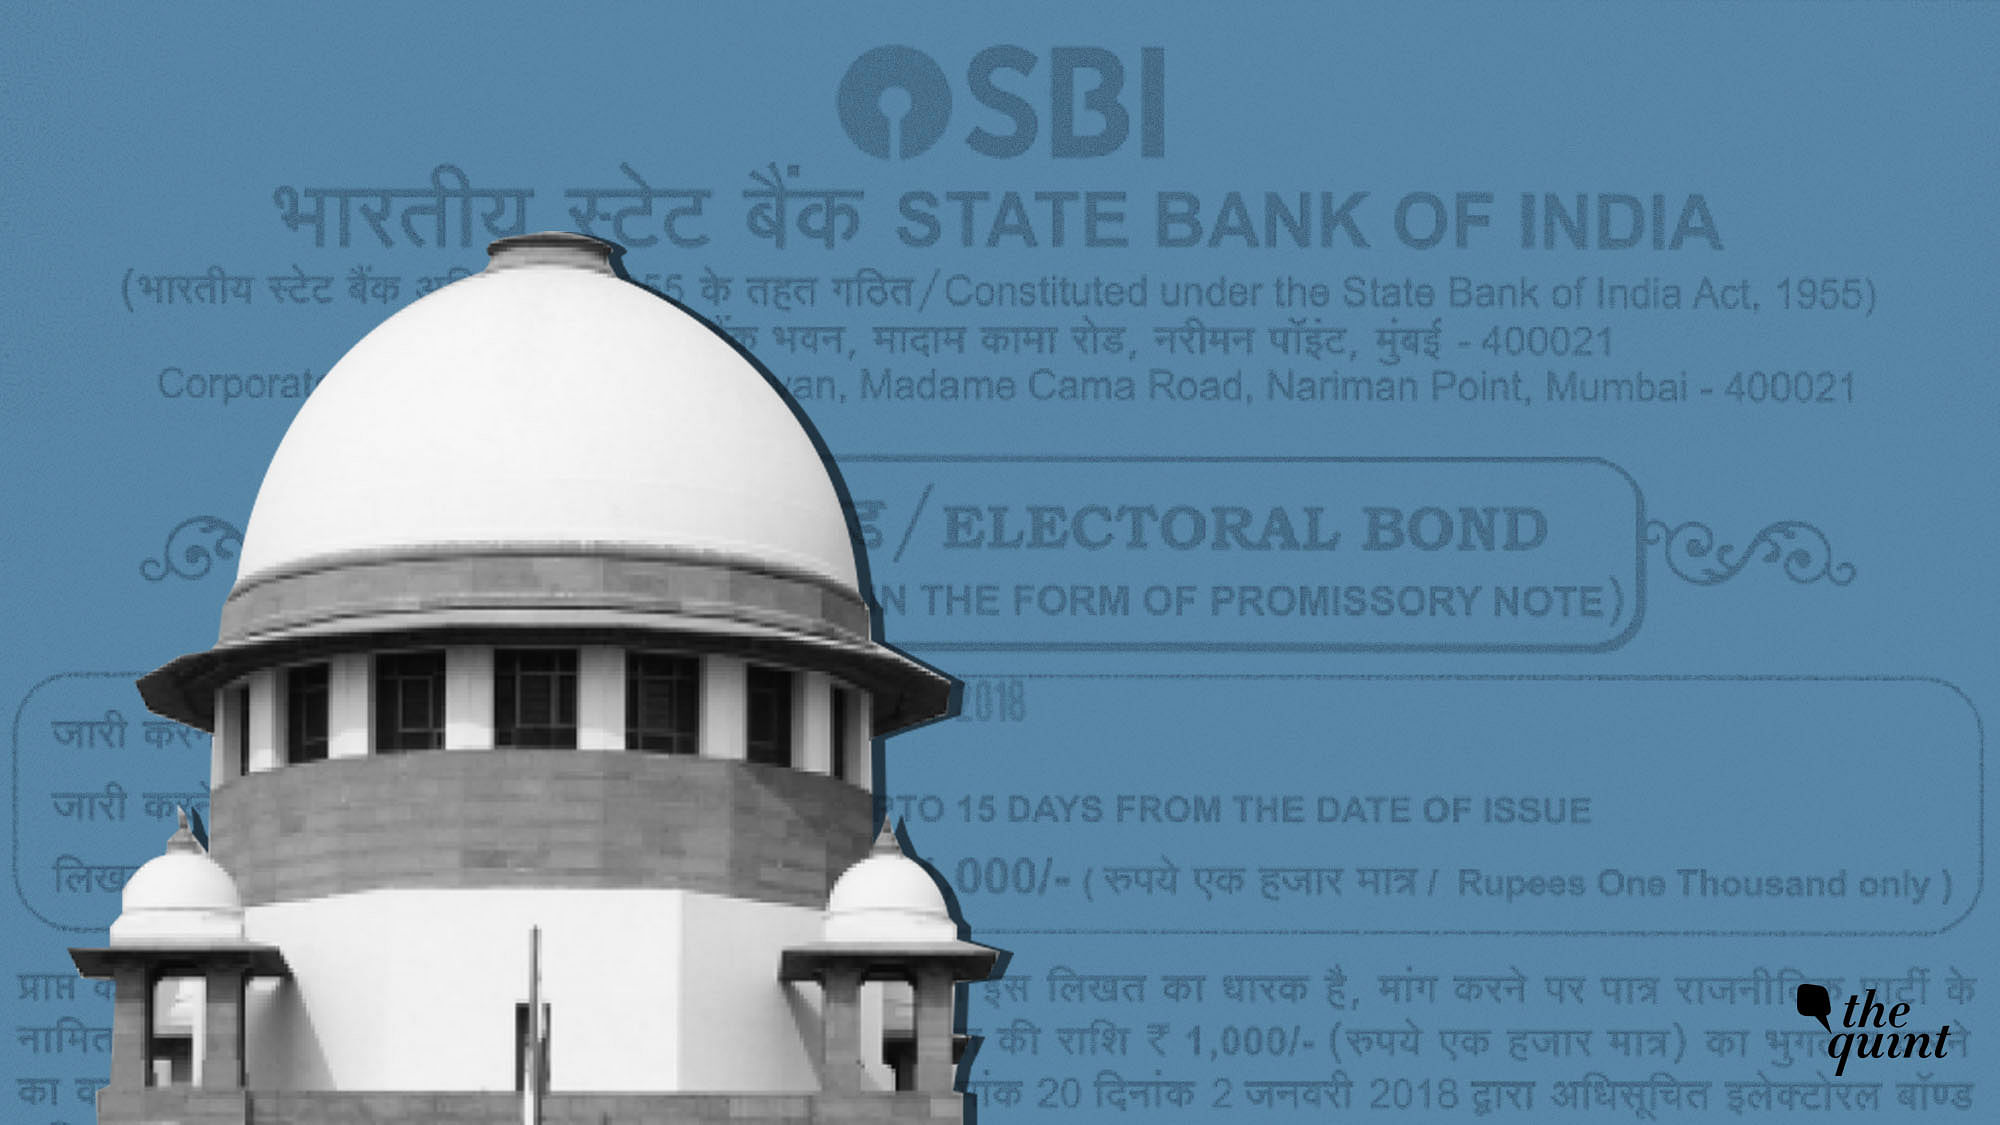 The Supreme Court will hear arguments about the constitutionality of the electoral bonds scheme.